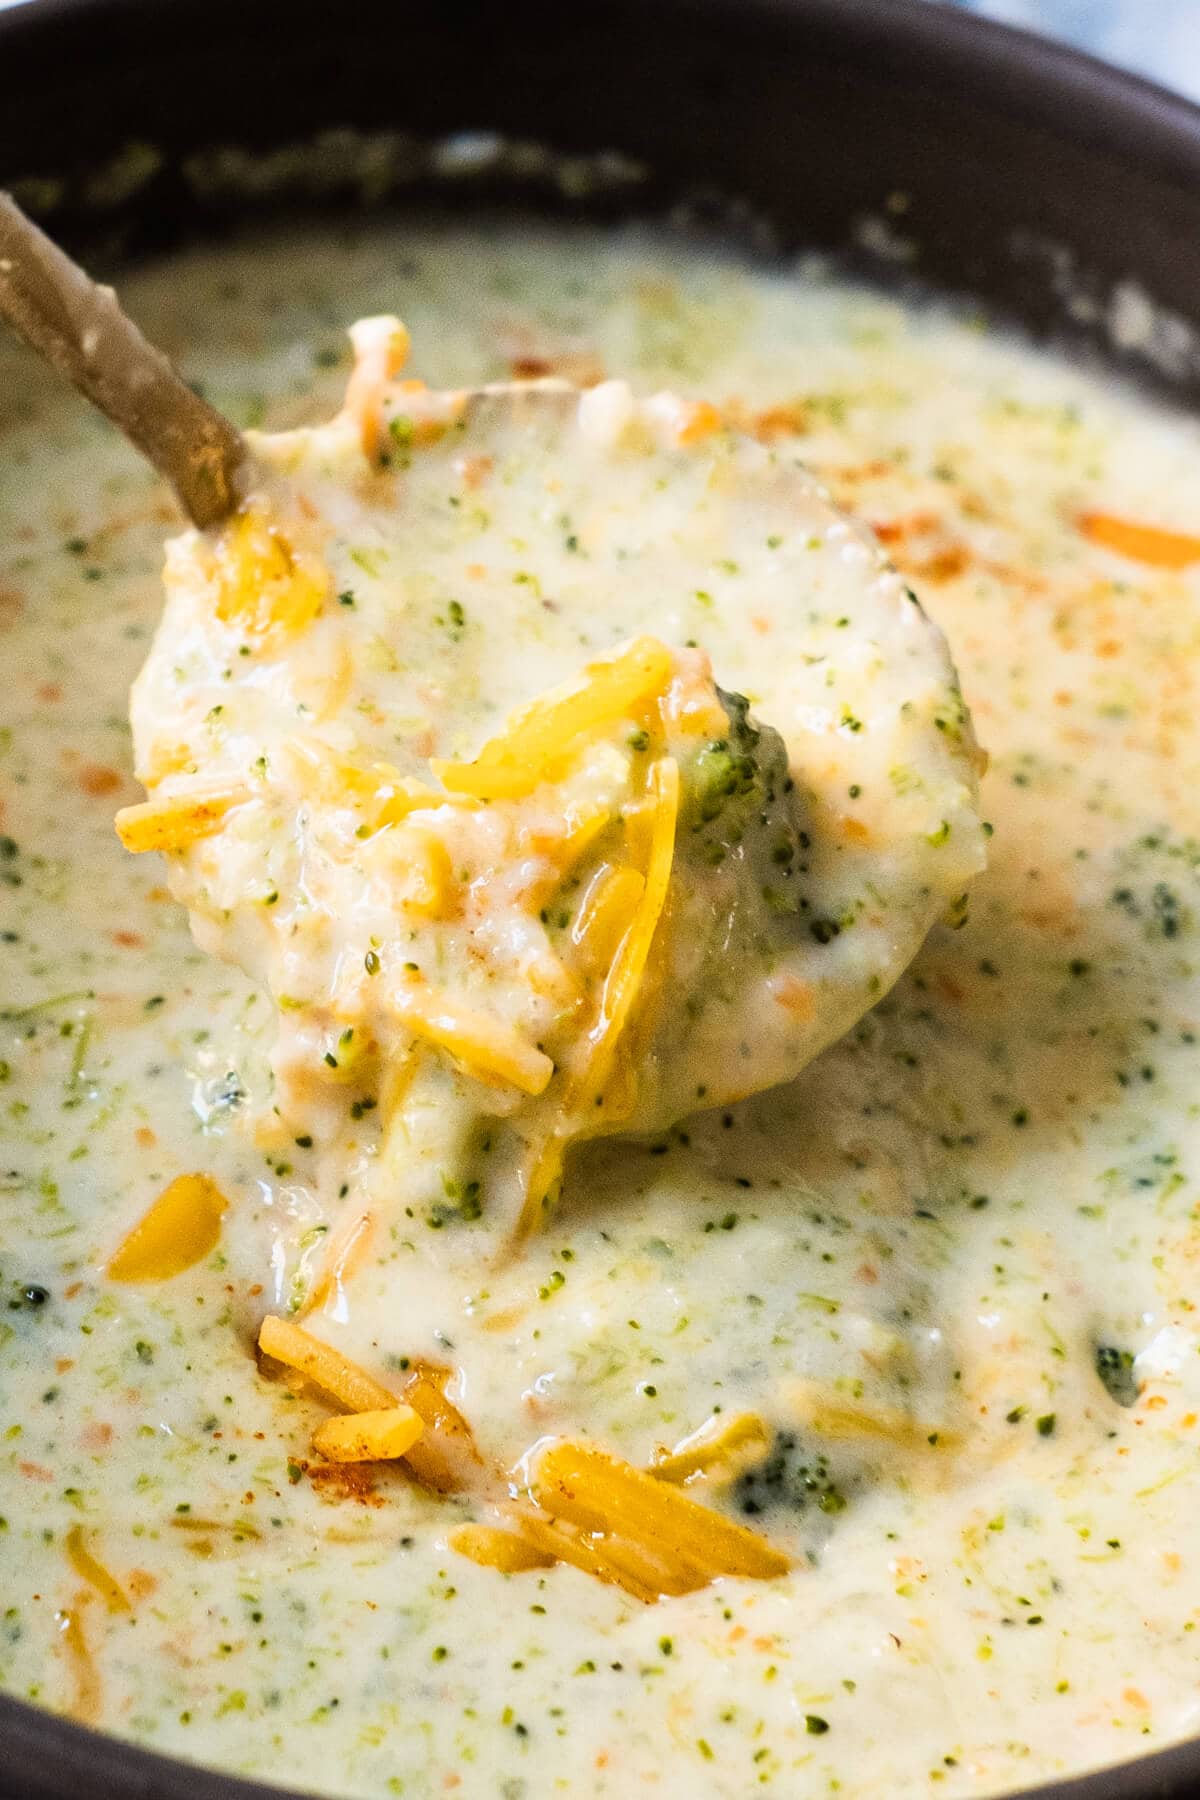 Thick, creamy soup filled with broccoli and cheddar scooped by the saddle. 